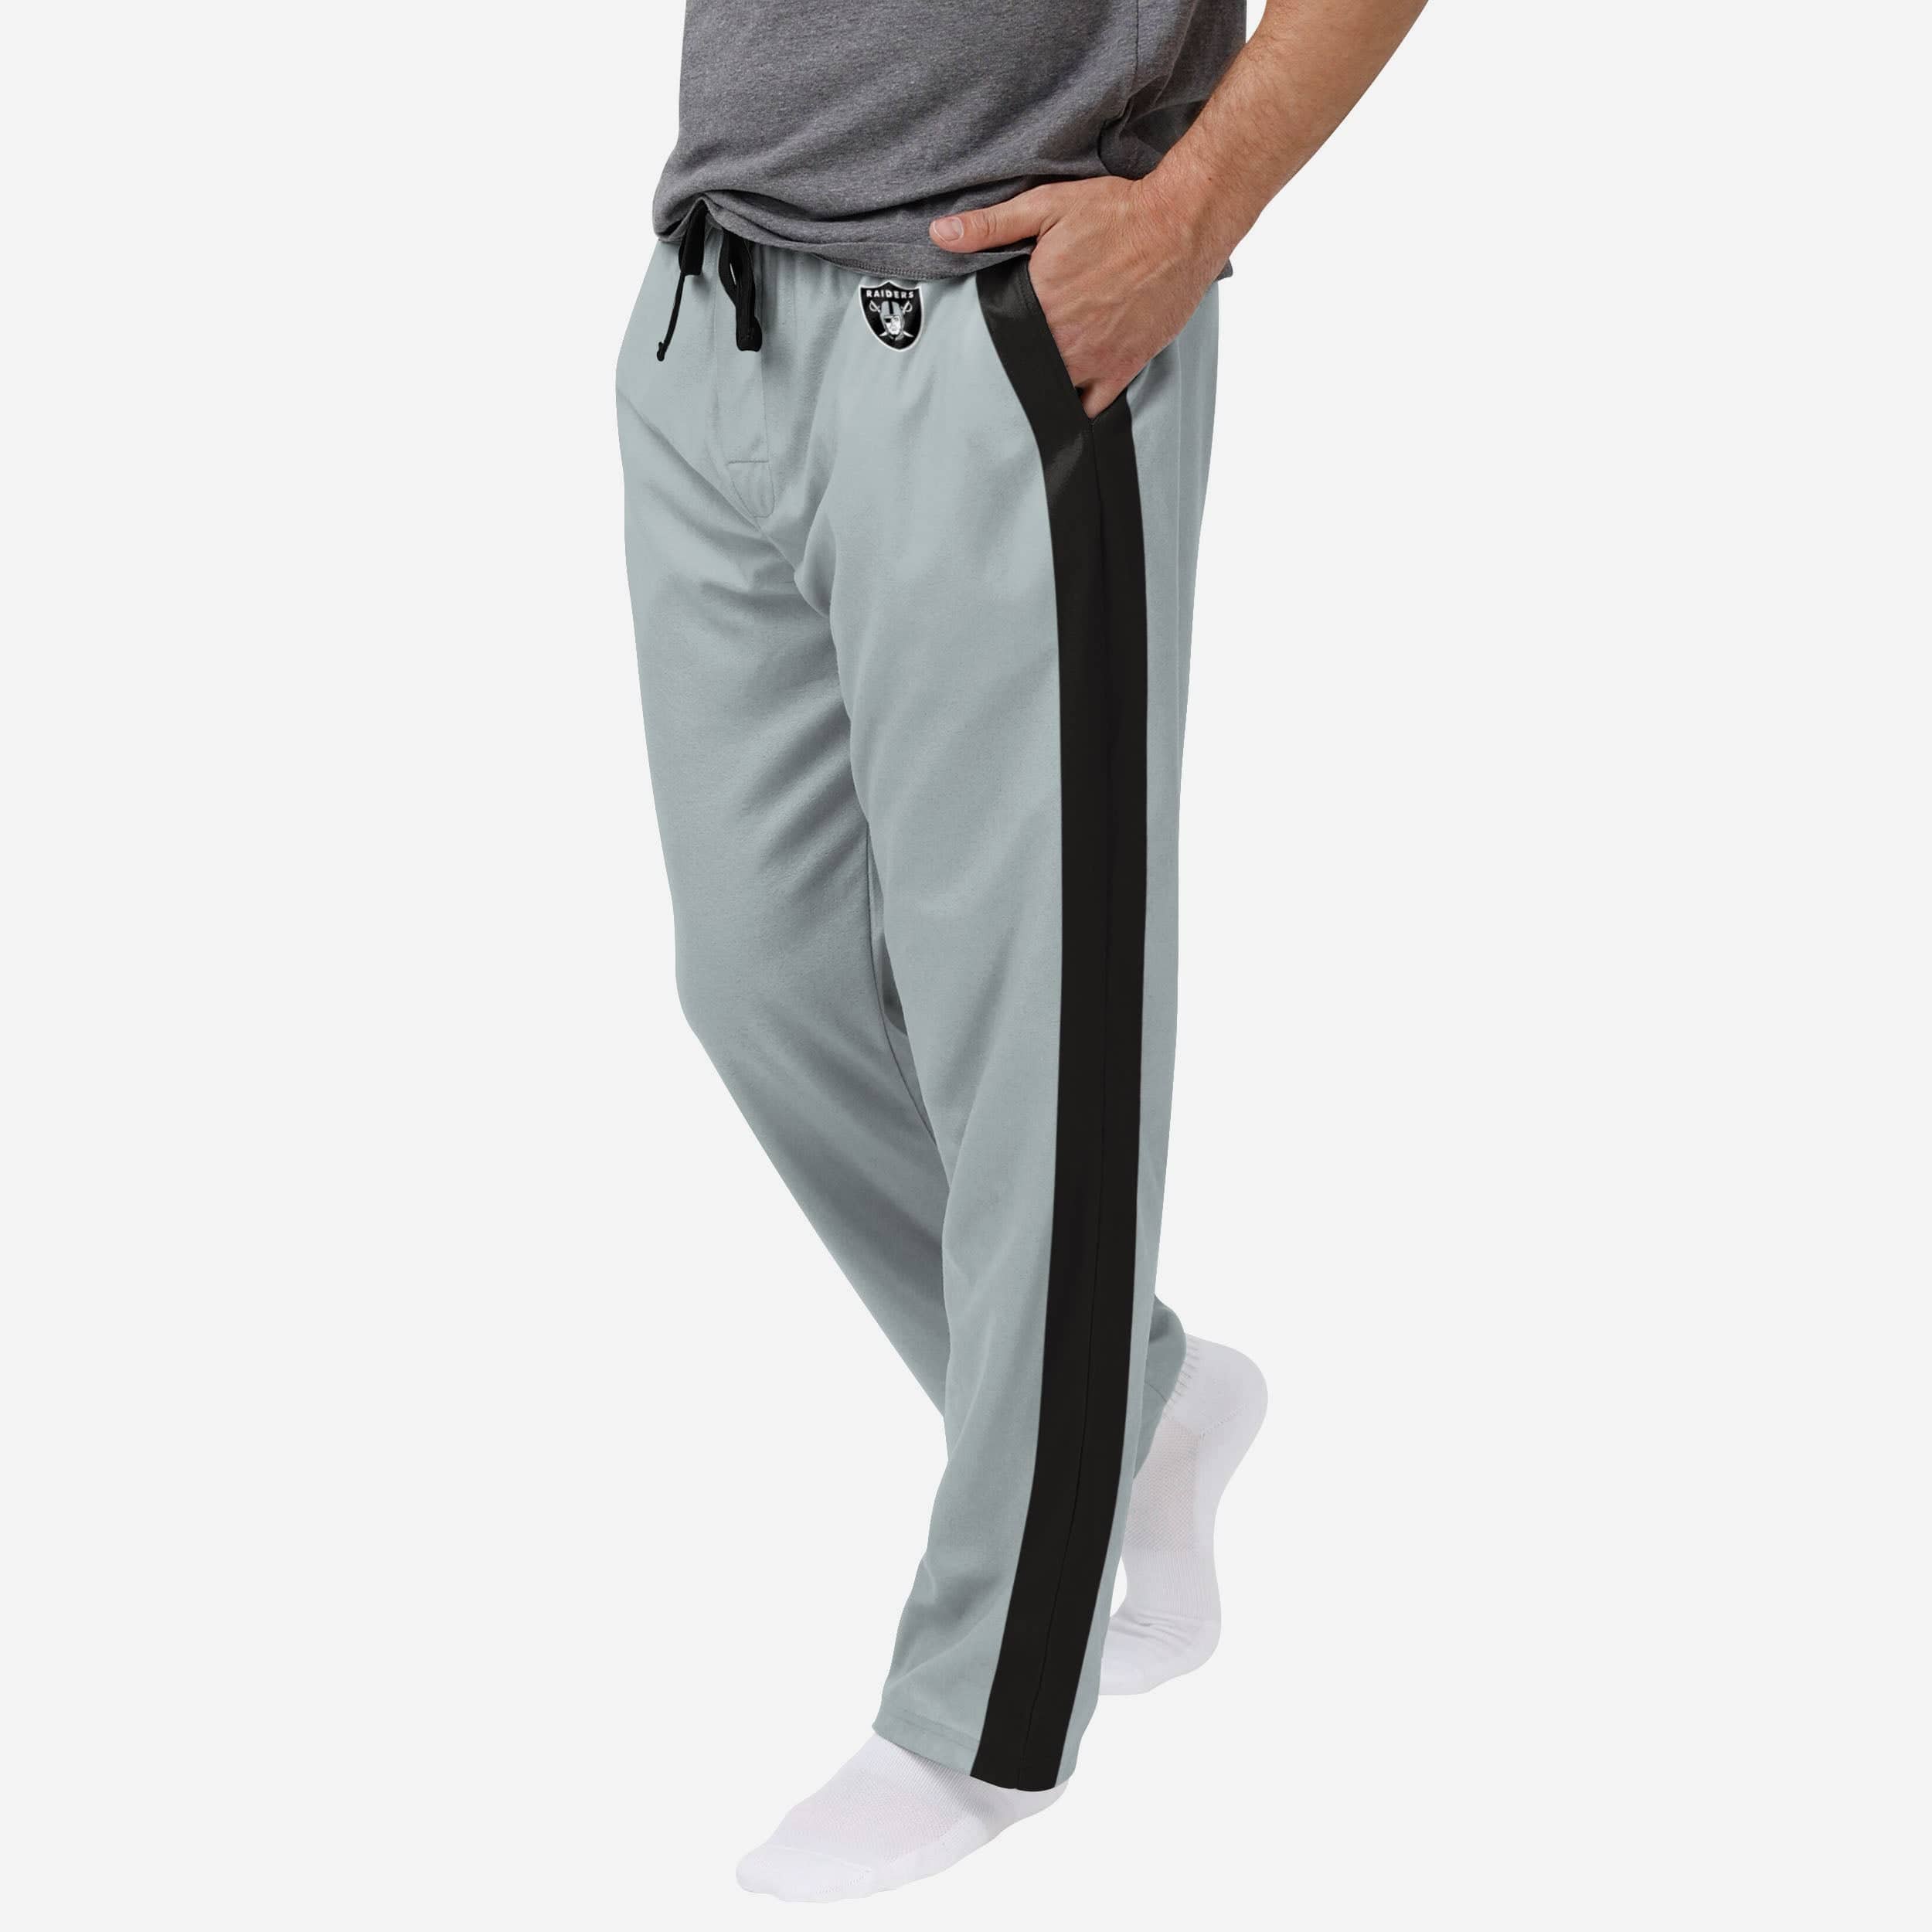 FOCO Tampa Bay Buccaneers NFL Mens Gameday Ready Lounge Pants - S